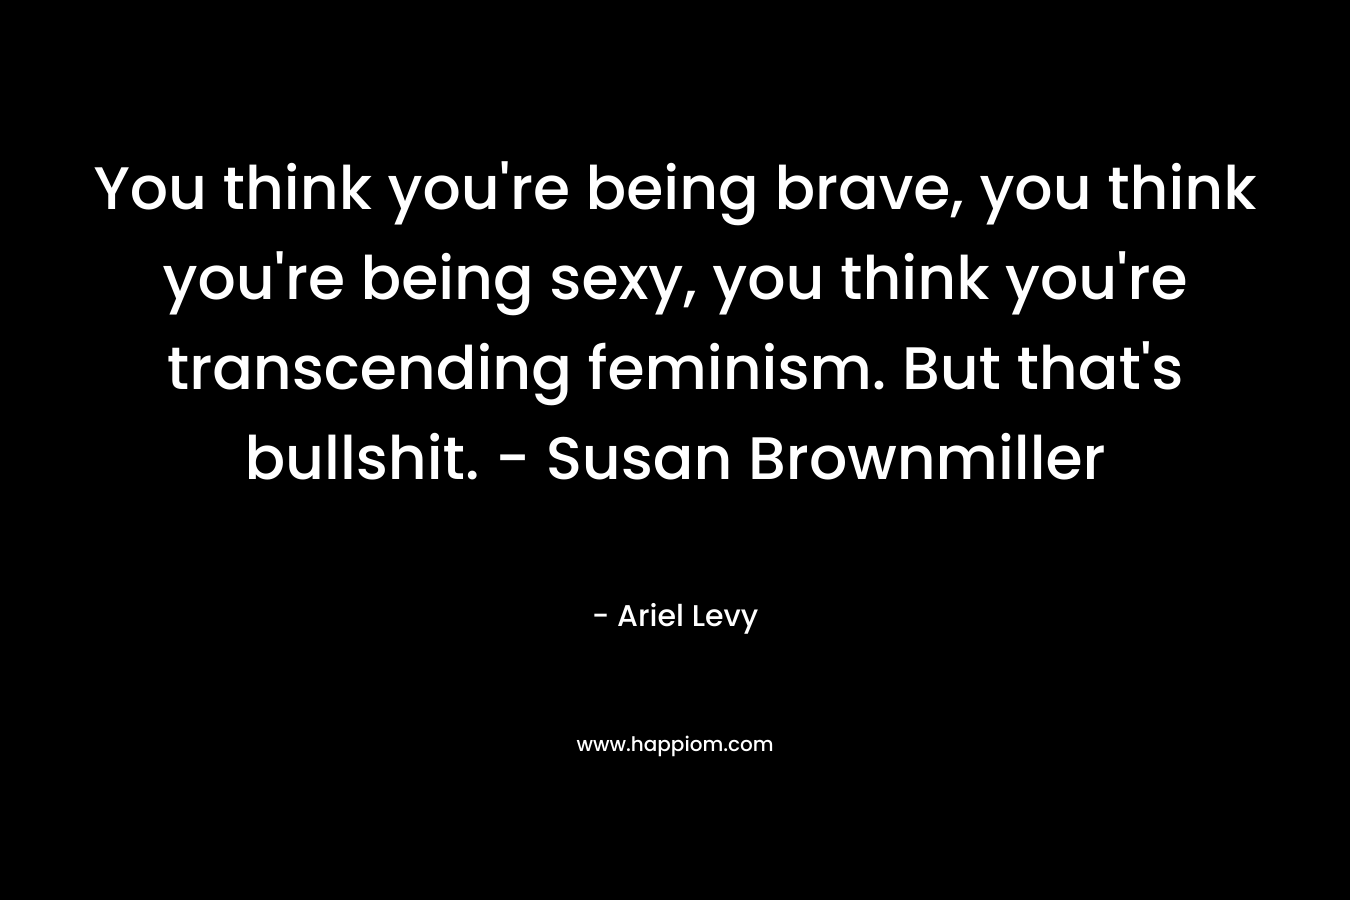 You think you're being brave, you think you're being sexy, you think you're transcending feminism. But that's bullshit. - Susan Brownmiller